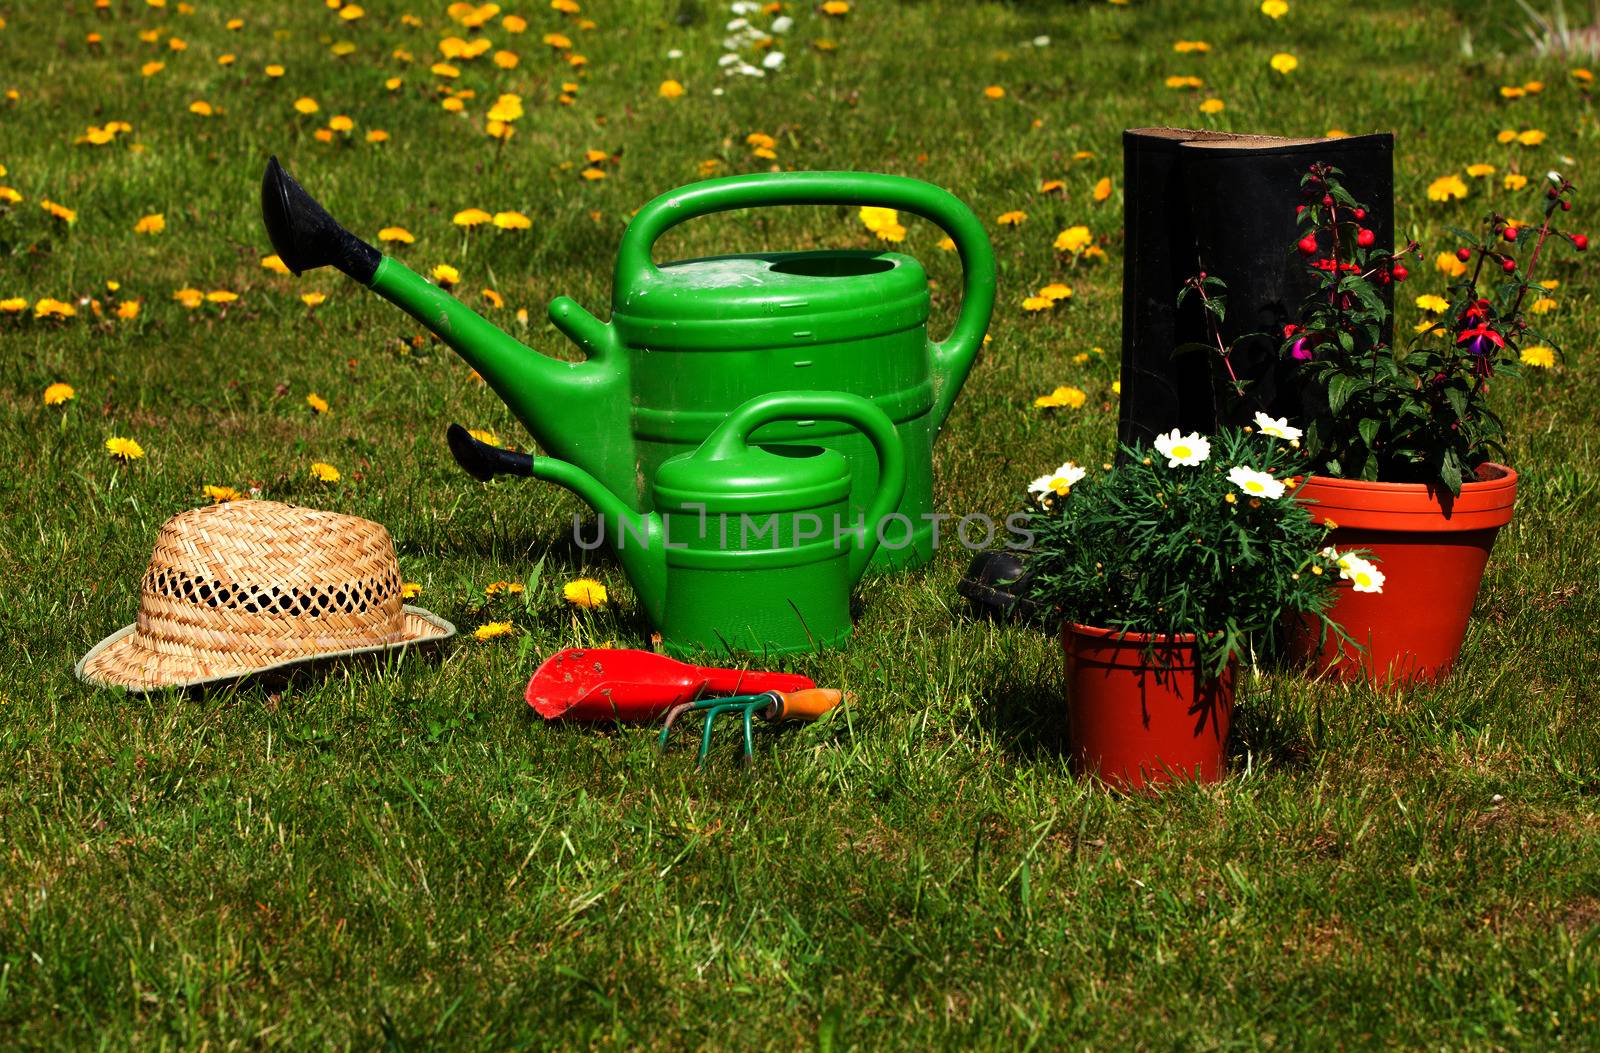 Gardening tools and a straw hat on the grass in the garden by motorolka